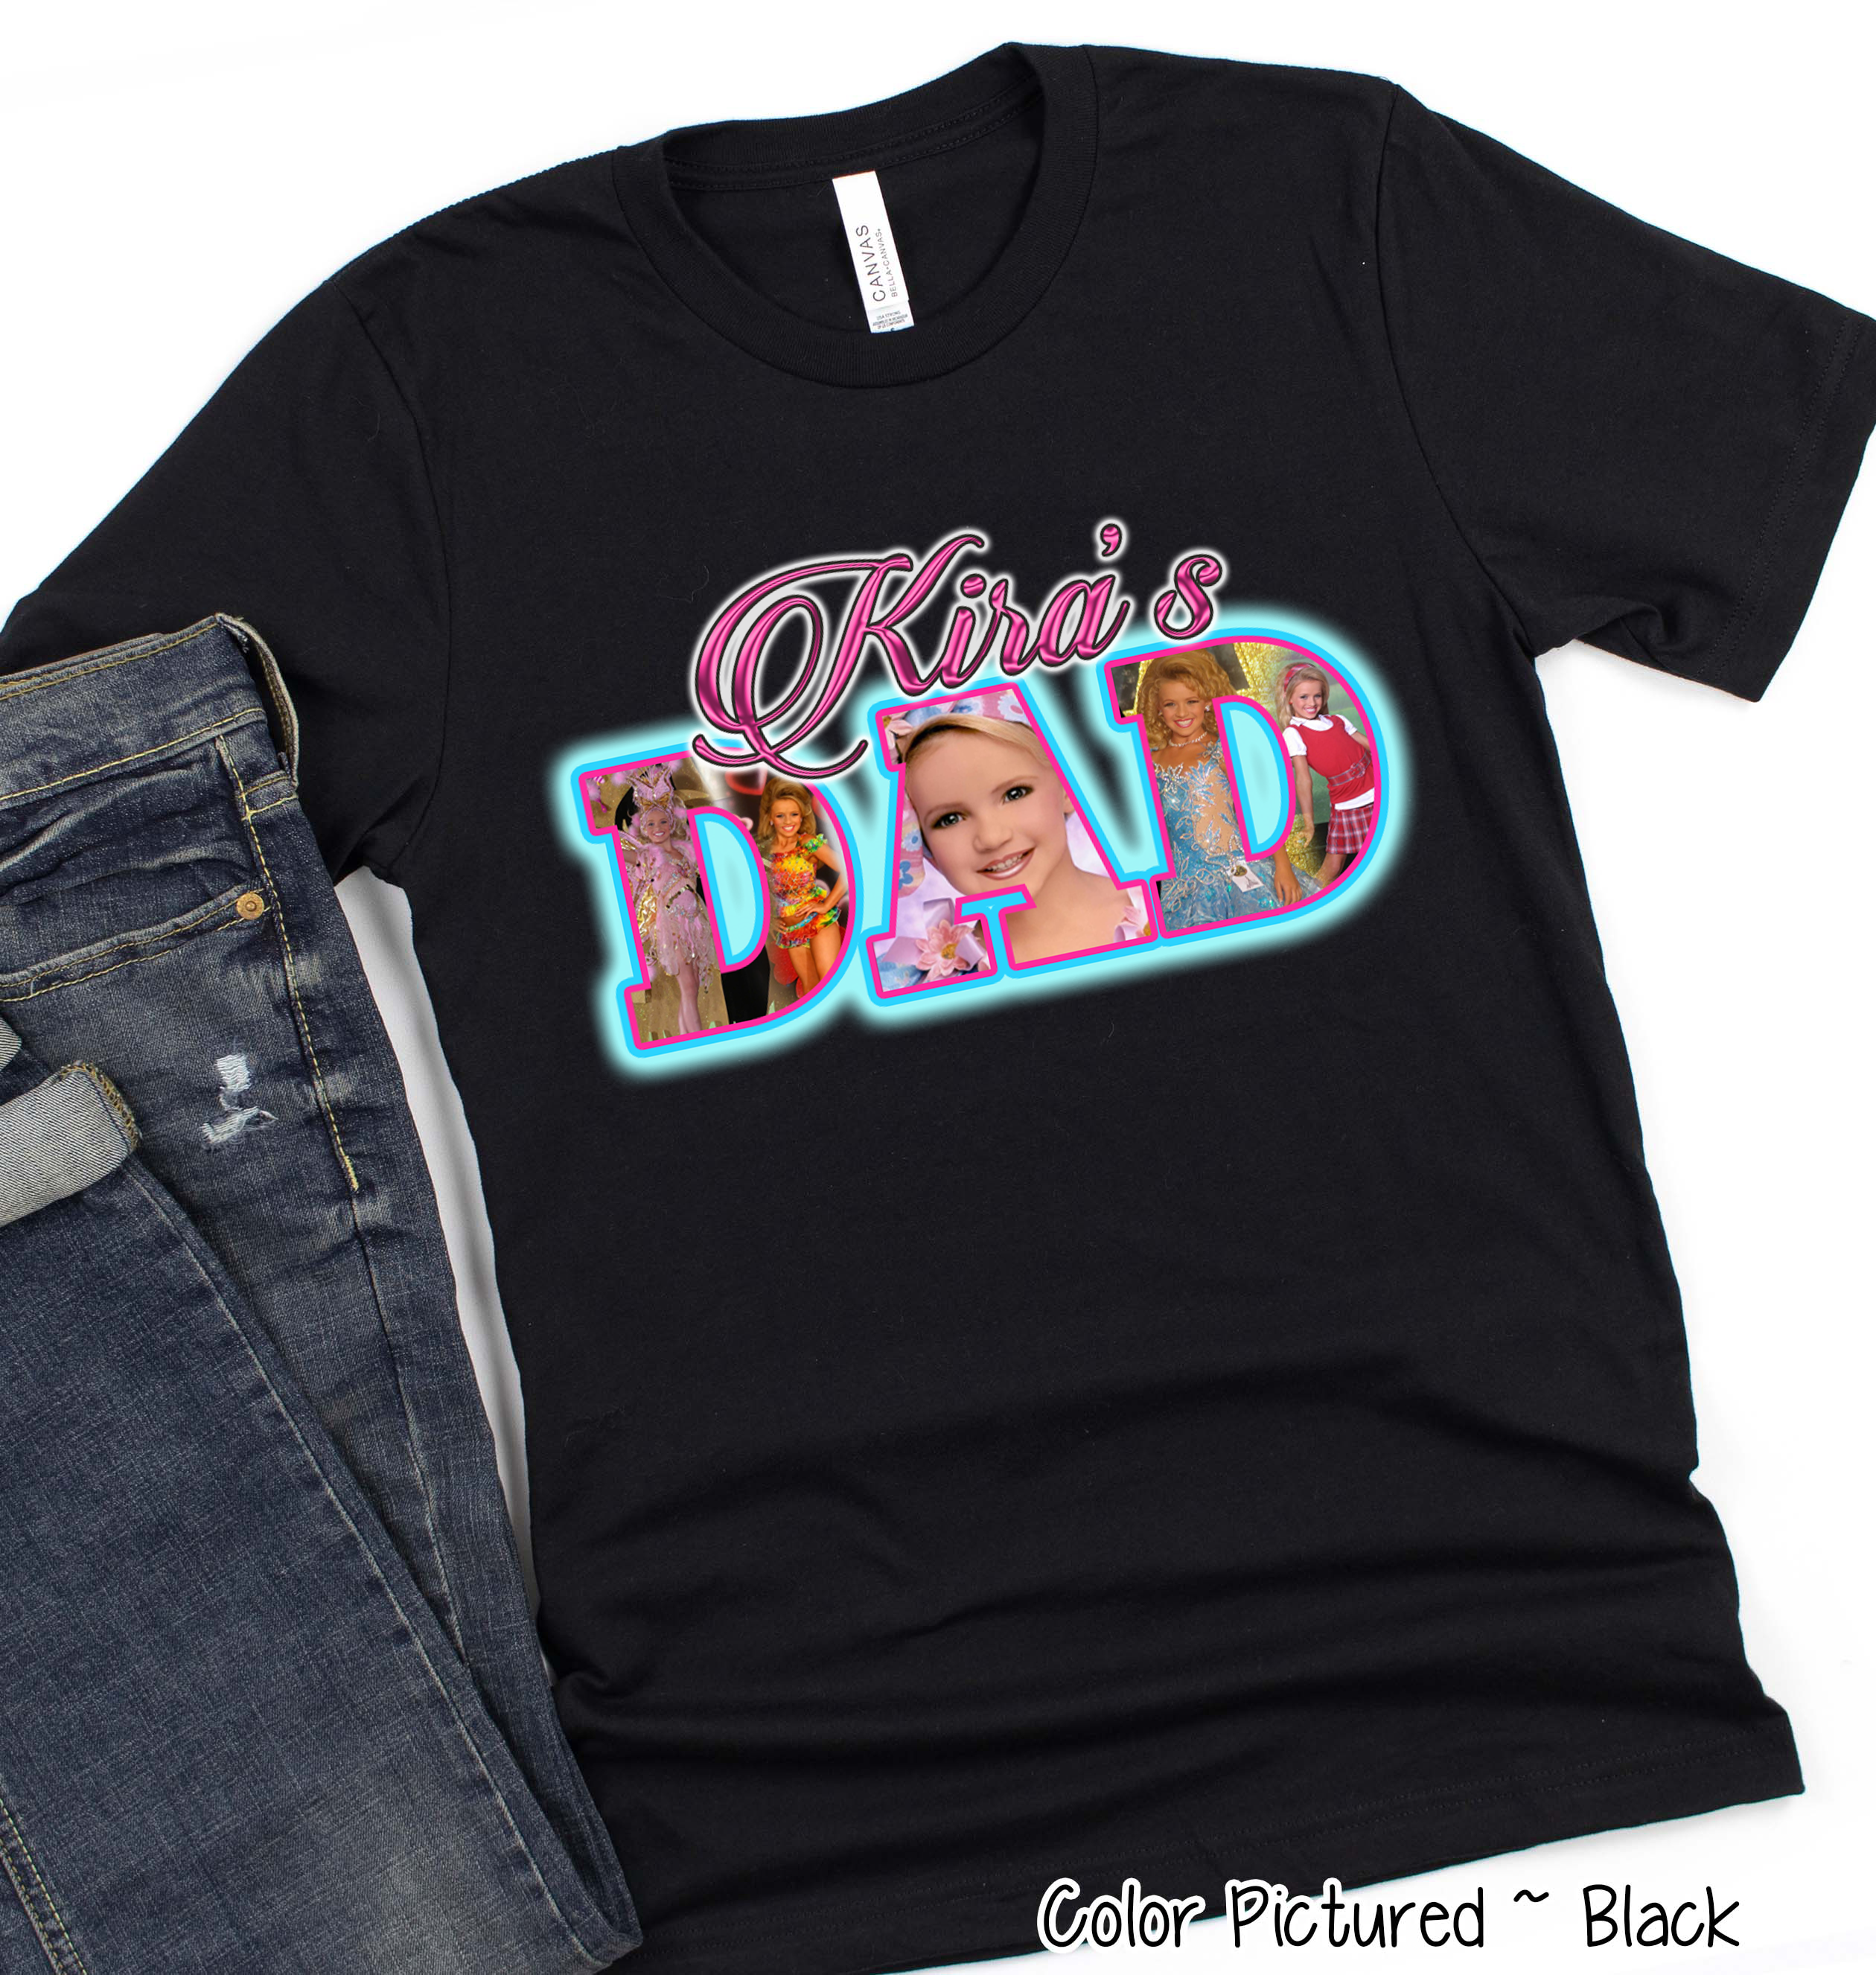 Pageant Mom (or any Title) Photo Tee